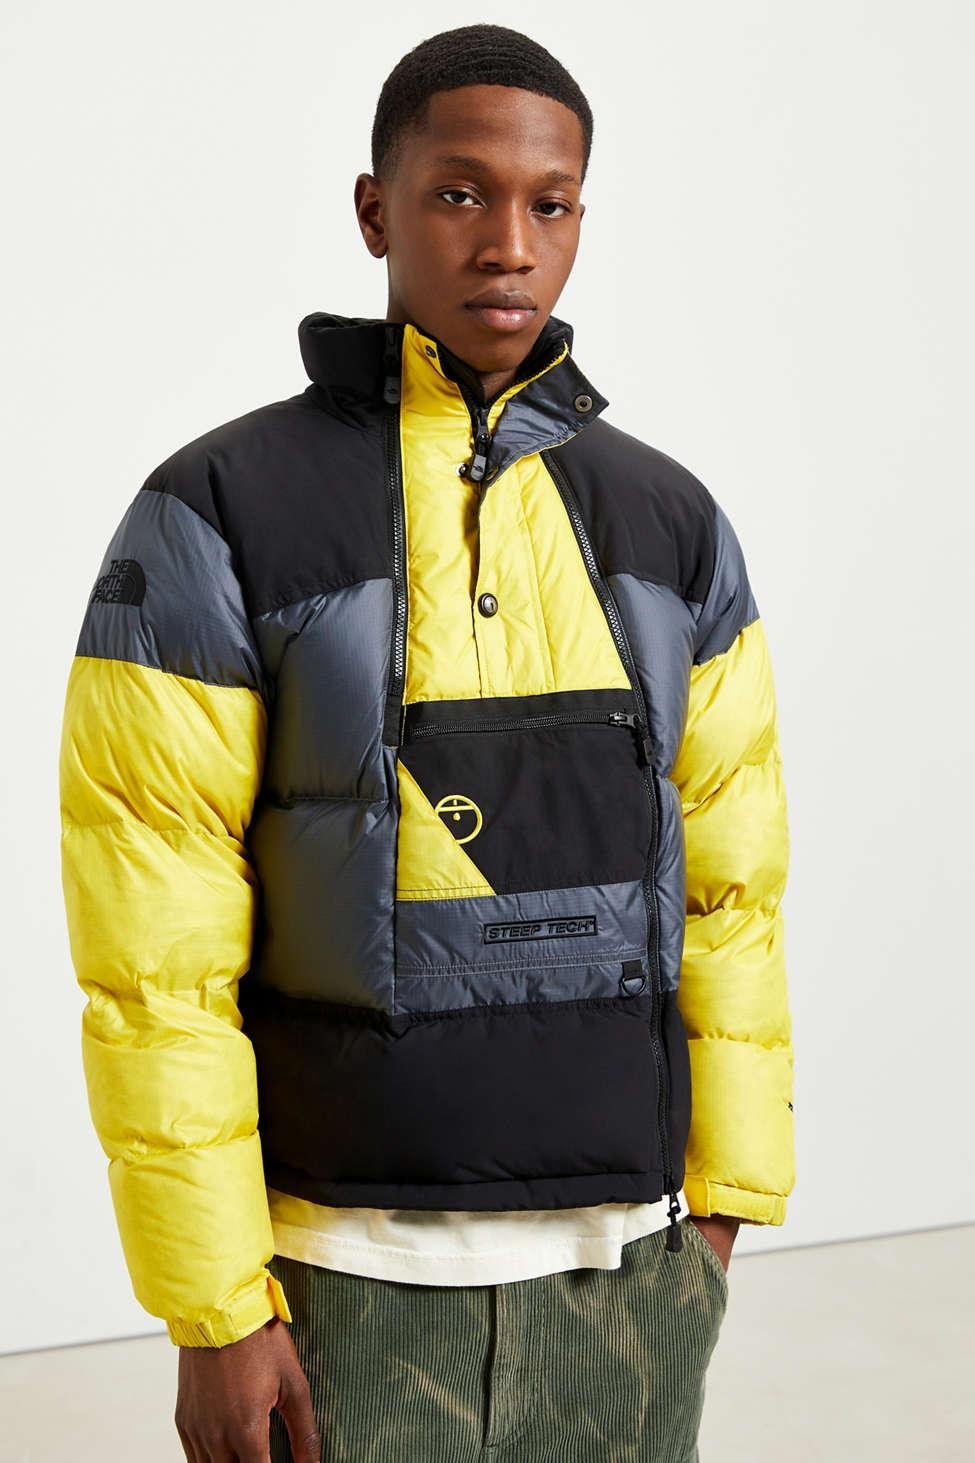 THE NORTH FACE】Steep Tech Down Jacket equaljustice.wy.gov